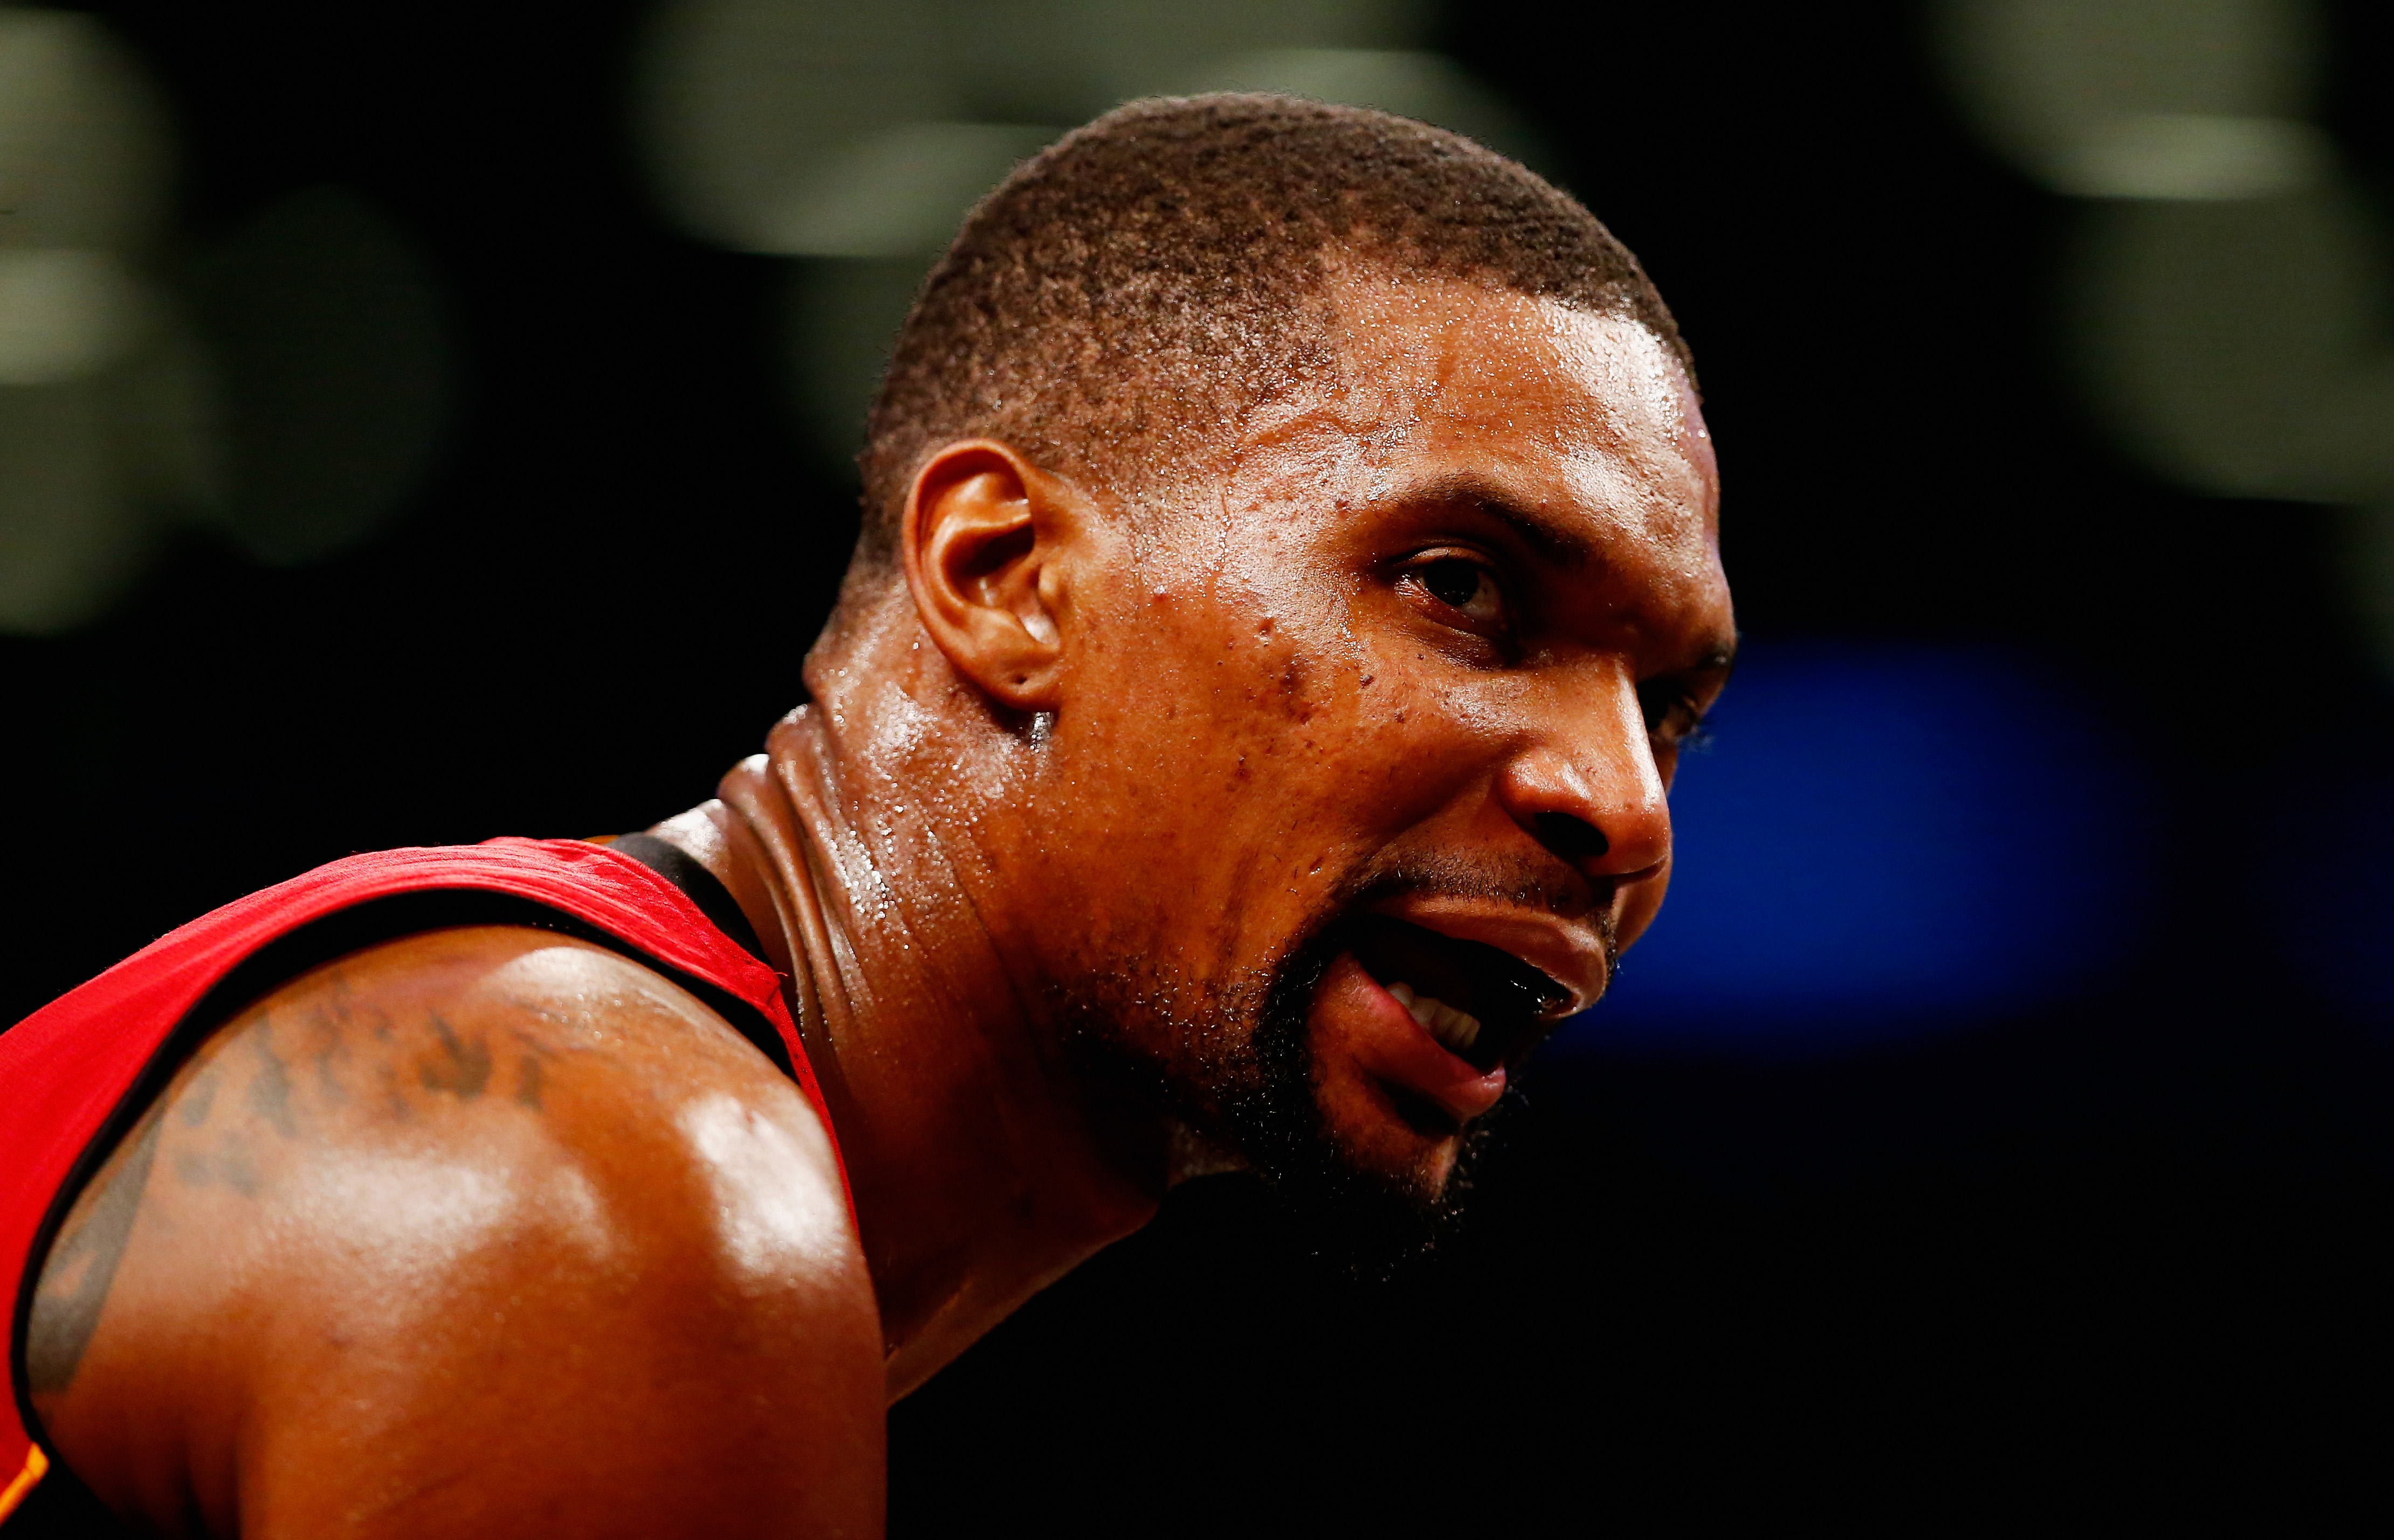 NEW YORK, NY - JANUARY 26: Chris Bosh #1 of the Miami Heat looks on against the Brooklyn Nets during their game at the Barclays Center on January 26, 2016 in New York City. NOTE TO USER: User expressly acknowledges and agrees that, by downloading and/or using this Photograph, user is consenting to the terms and conditions of the Getty Images License Agreement.   Al Bello/Getty Images/AFP